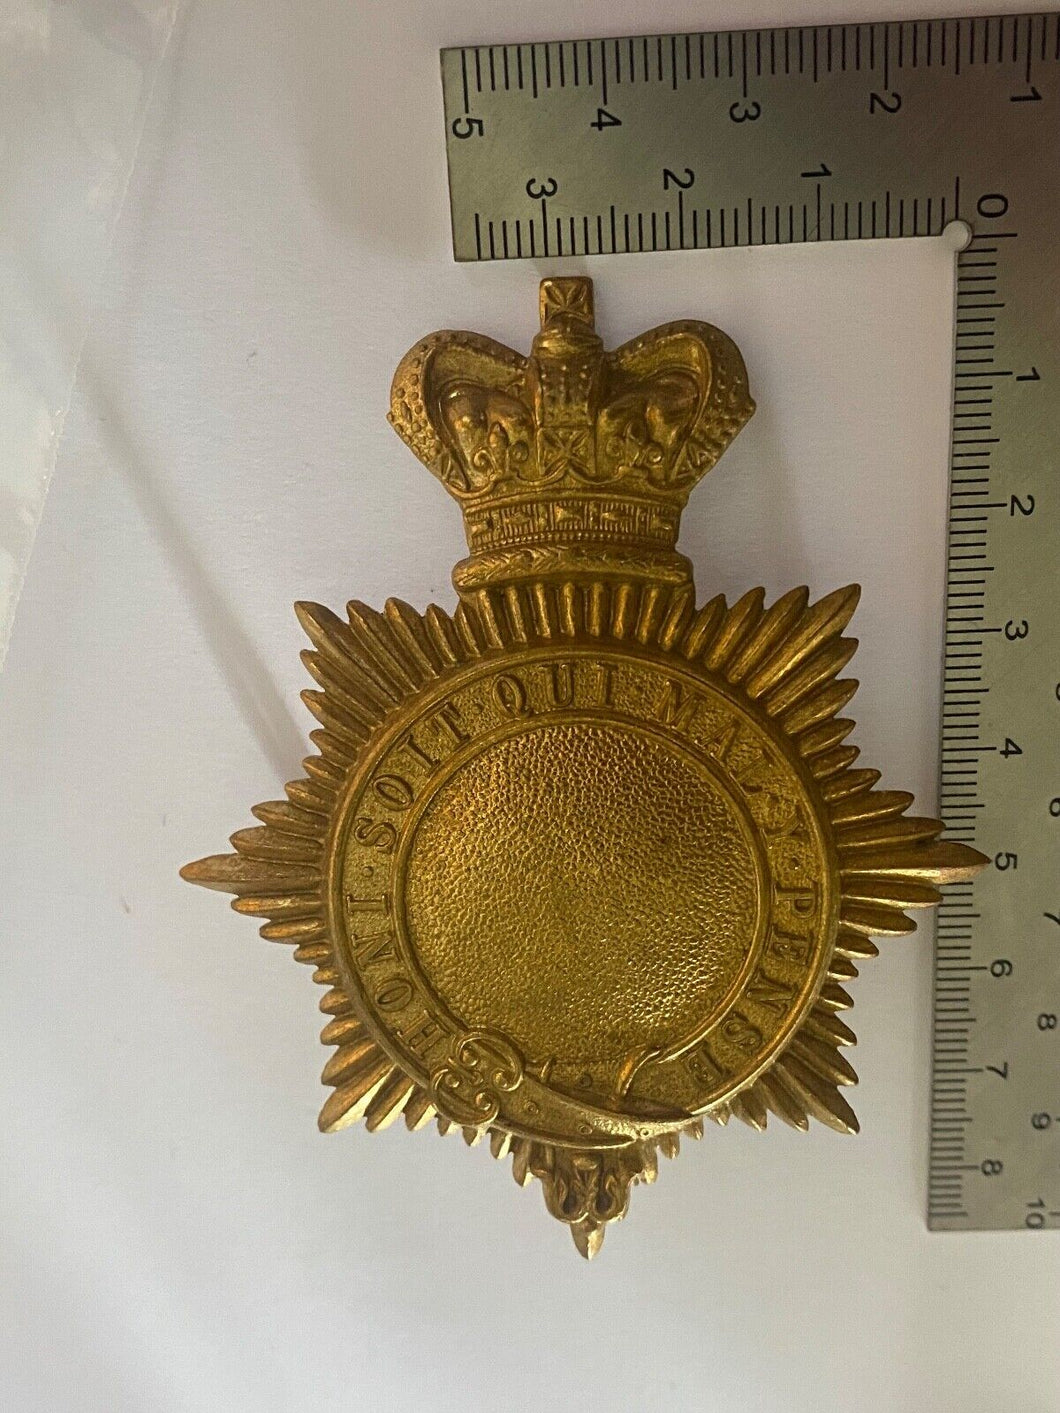 Reproduction Large Gilt Victorian Crown British Army Cap Badge